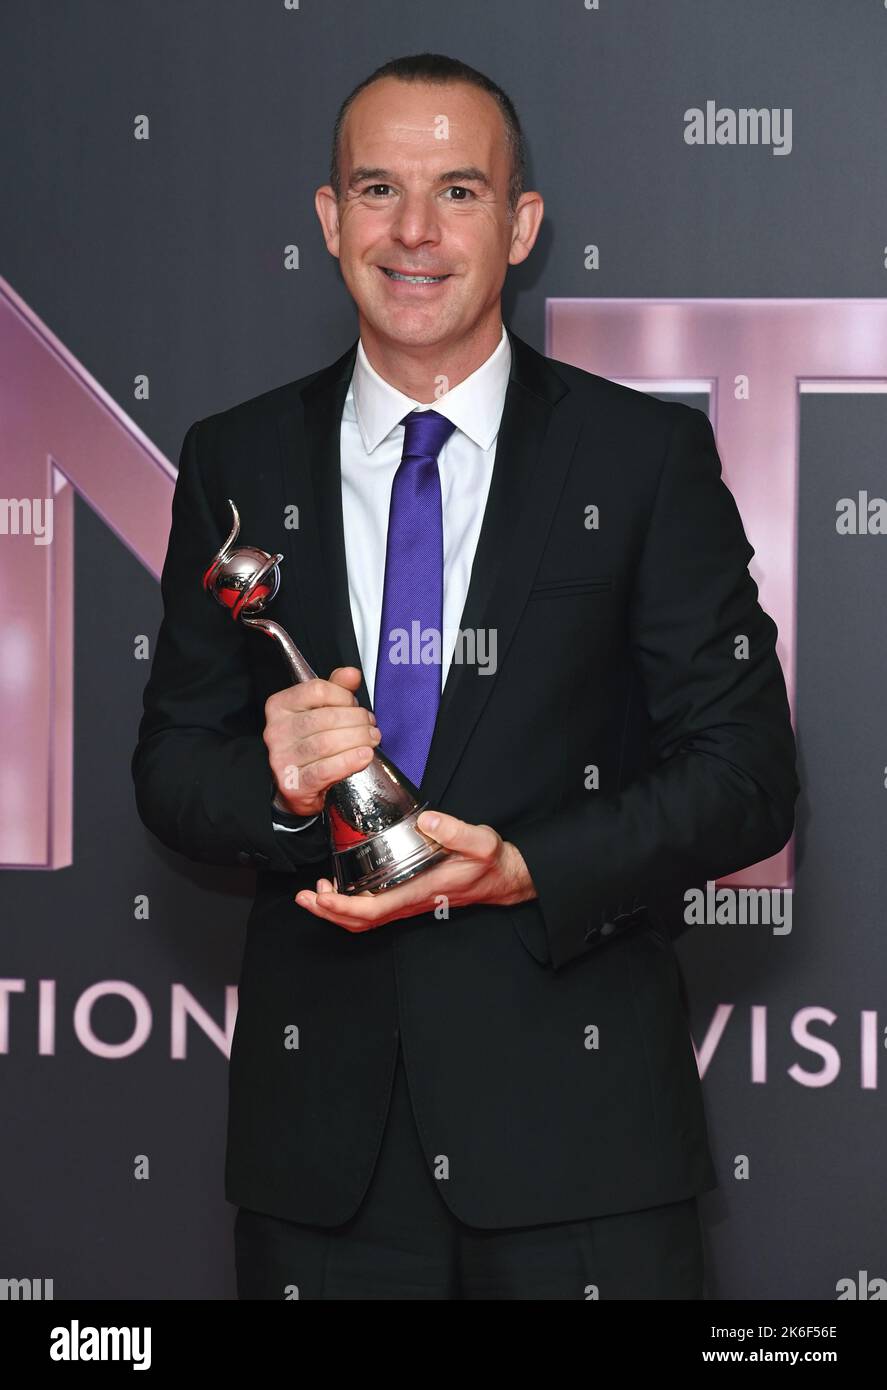 October 13th, 2022. London, UK. Martin Lewis in the press room after winning the TV Expert award at the 2022 National Television Awards, Wembley Arena. Credit: Doug Peters/EMPICS/Alamy Live News Stock Photo